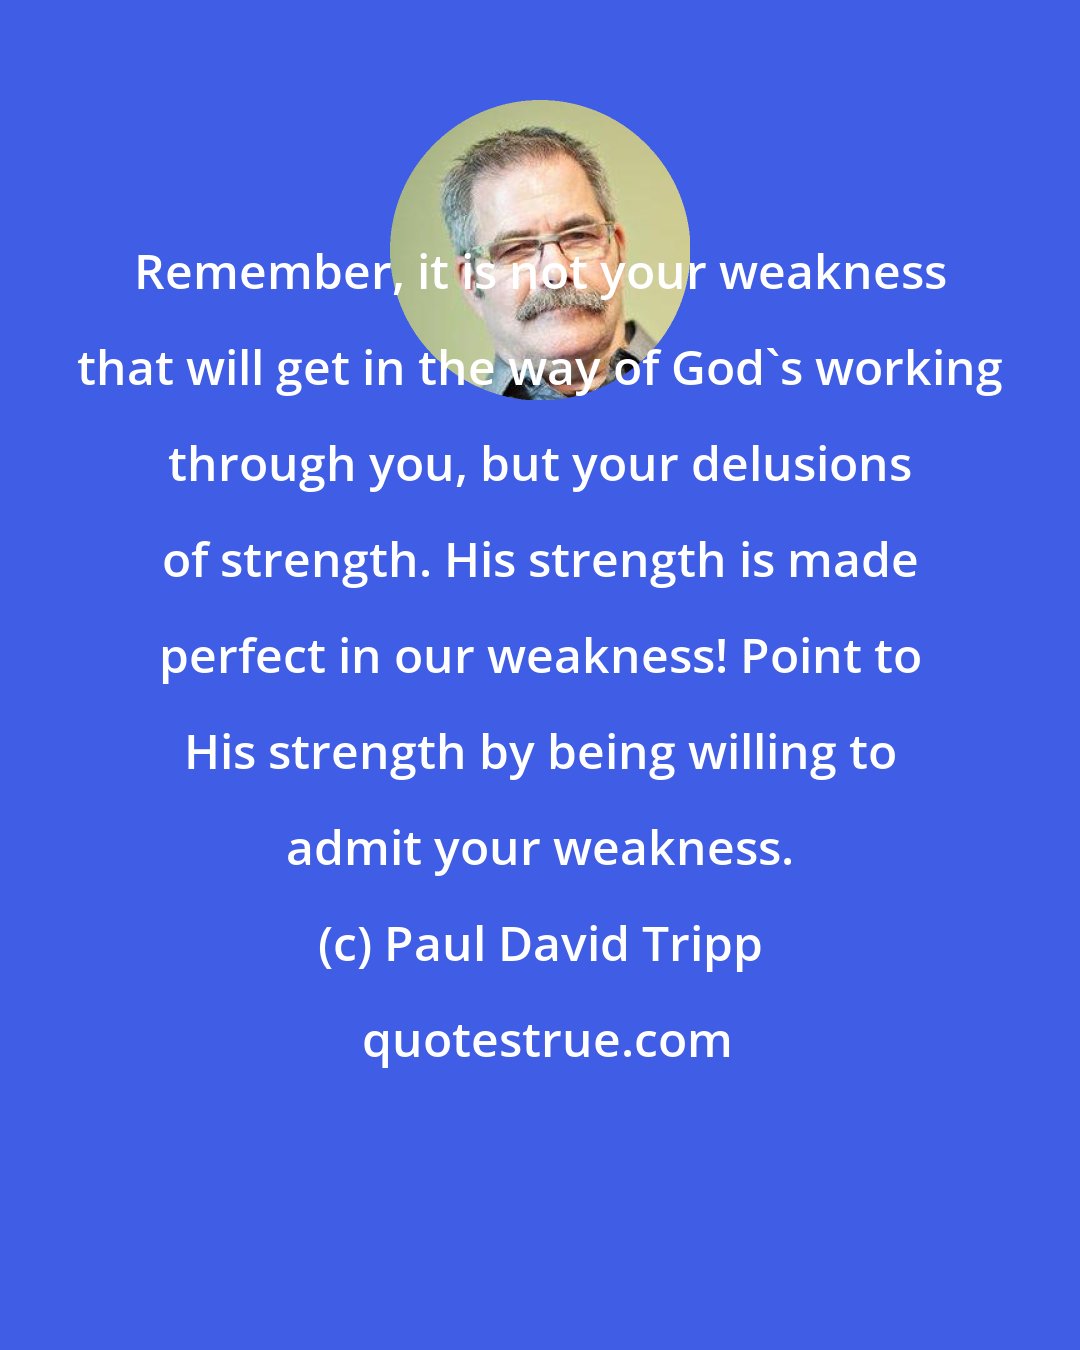 Paul David Tripp: Remember, it is not your weakness that will get in the way of God's working through you, but your delusions of strength. His strength is made perfect in our weakness! Point to His strength by being willing to admit your weakness.